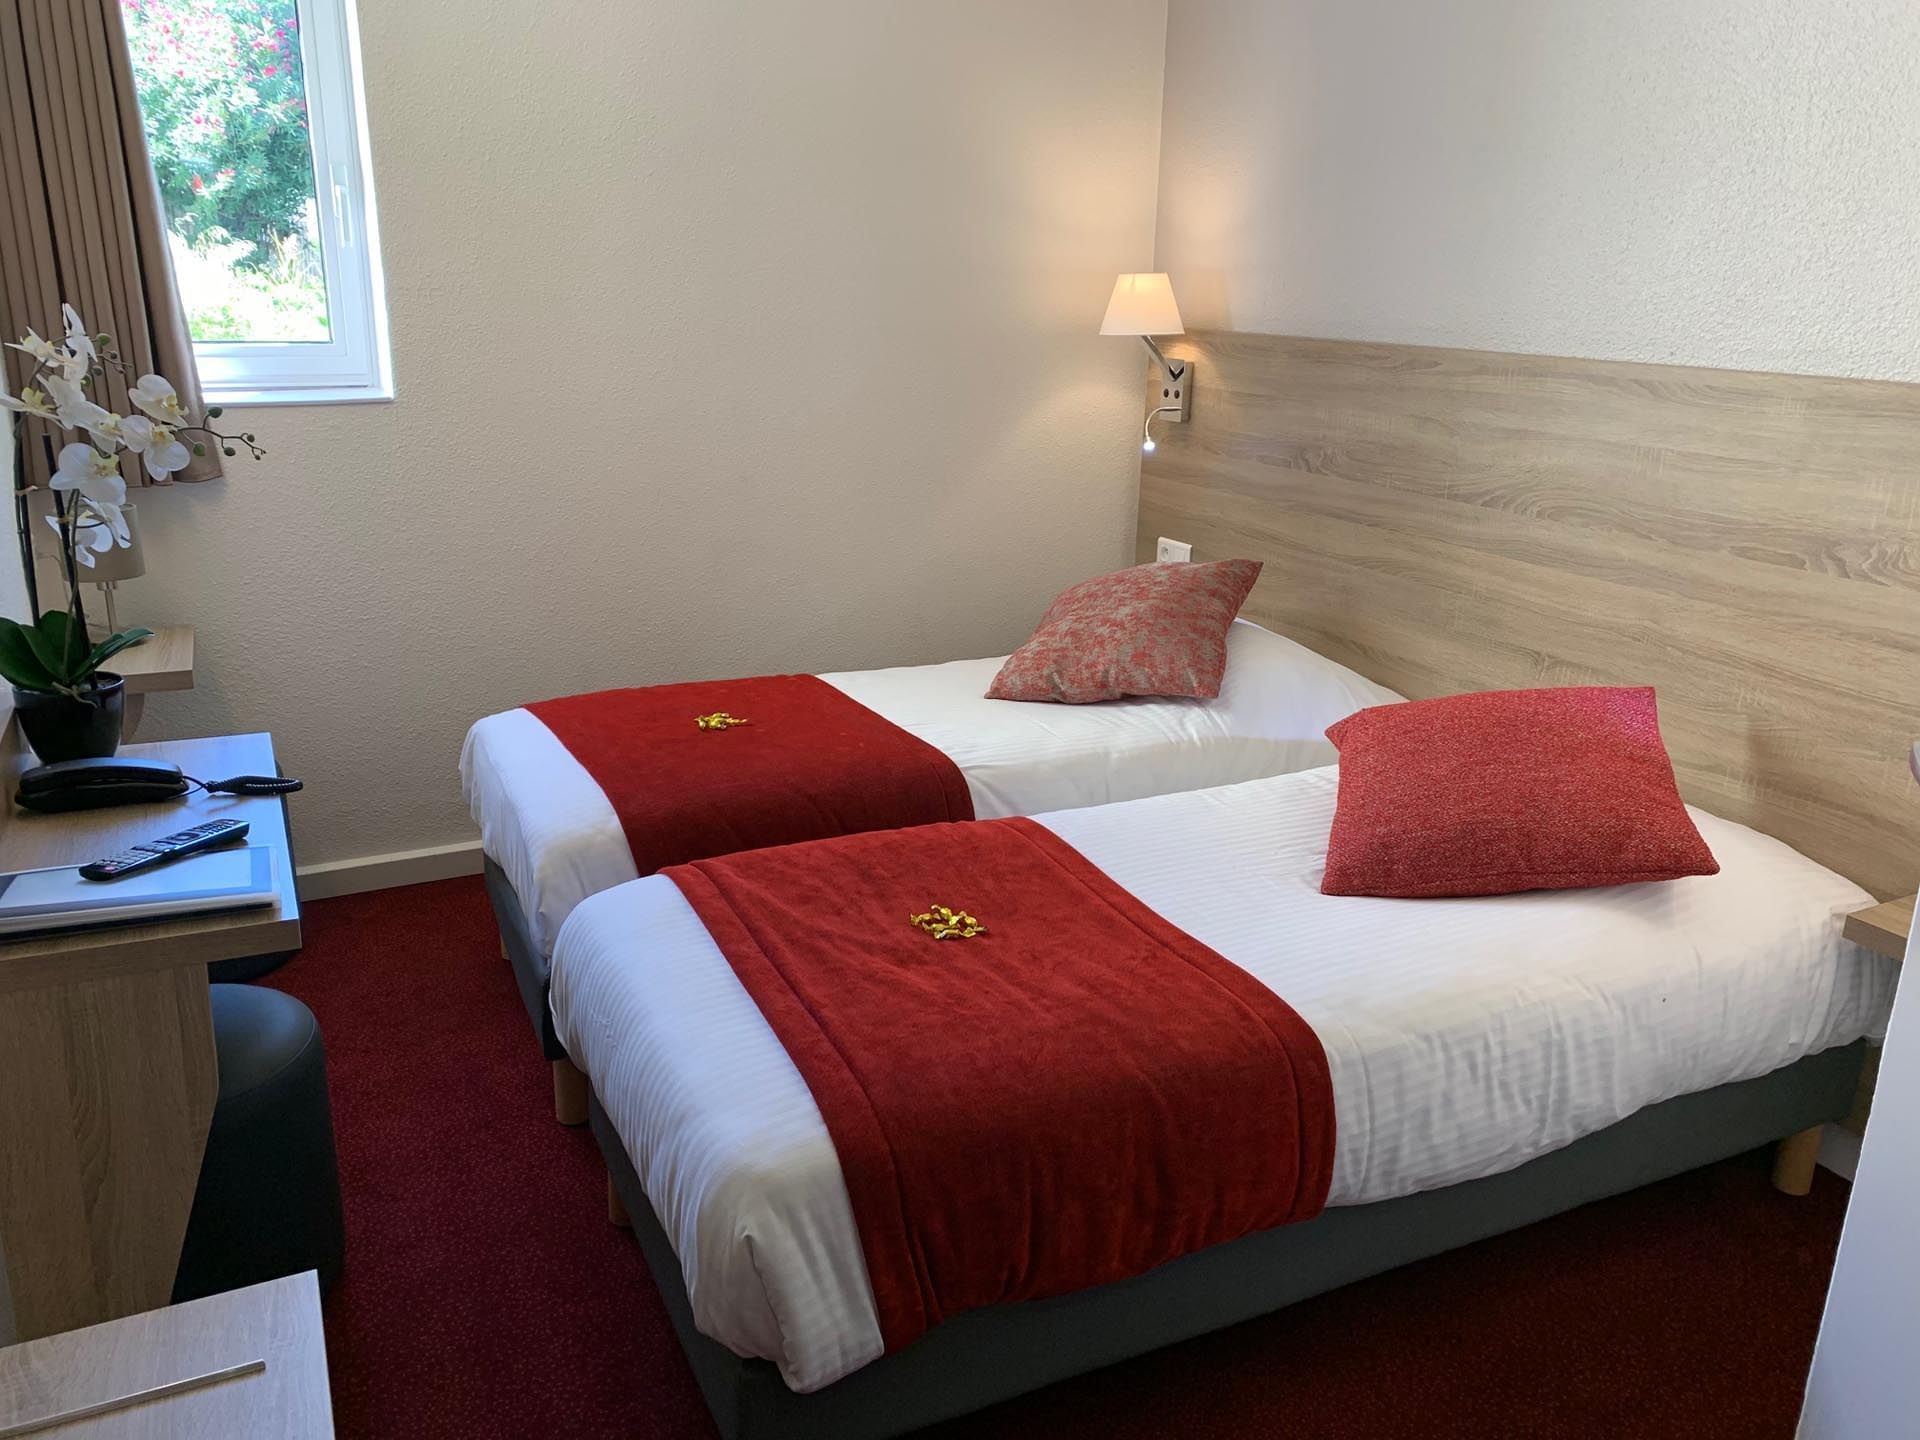 A room with cozy twin beds at hotel Costieres